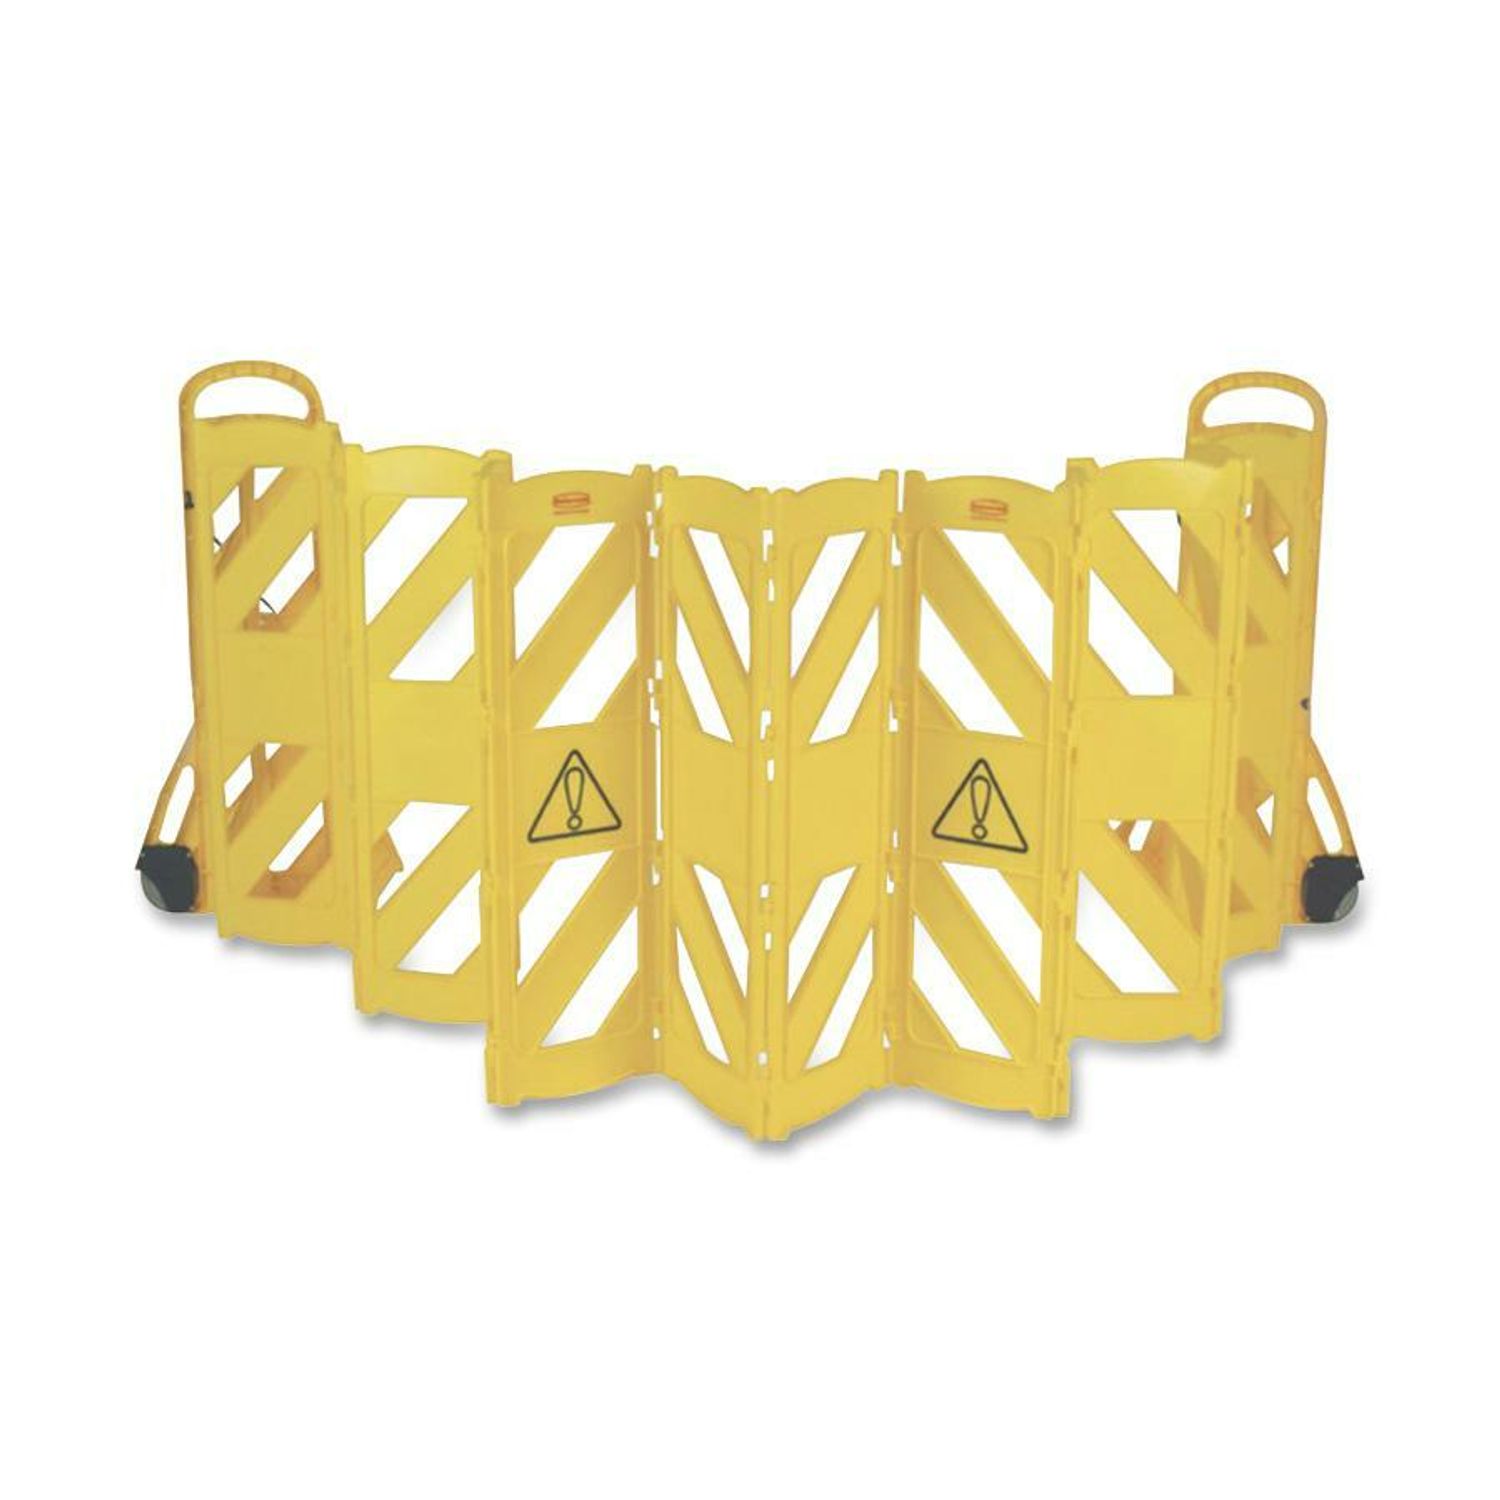 Foldable Mobile Caution Barrier 24" Height, Caster, Yellow, 1 Each